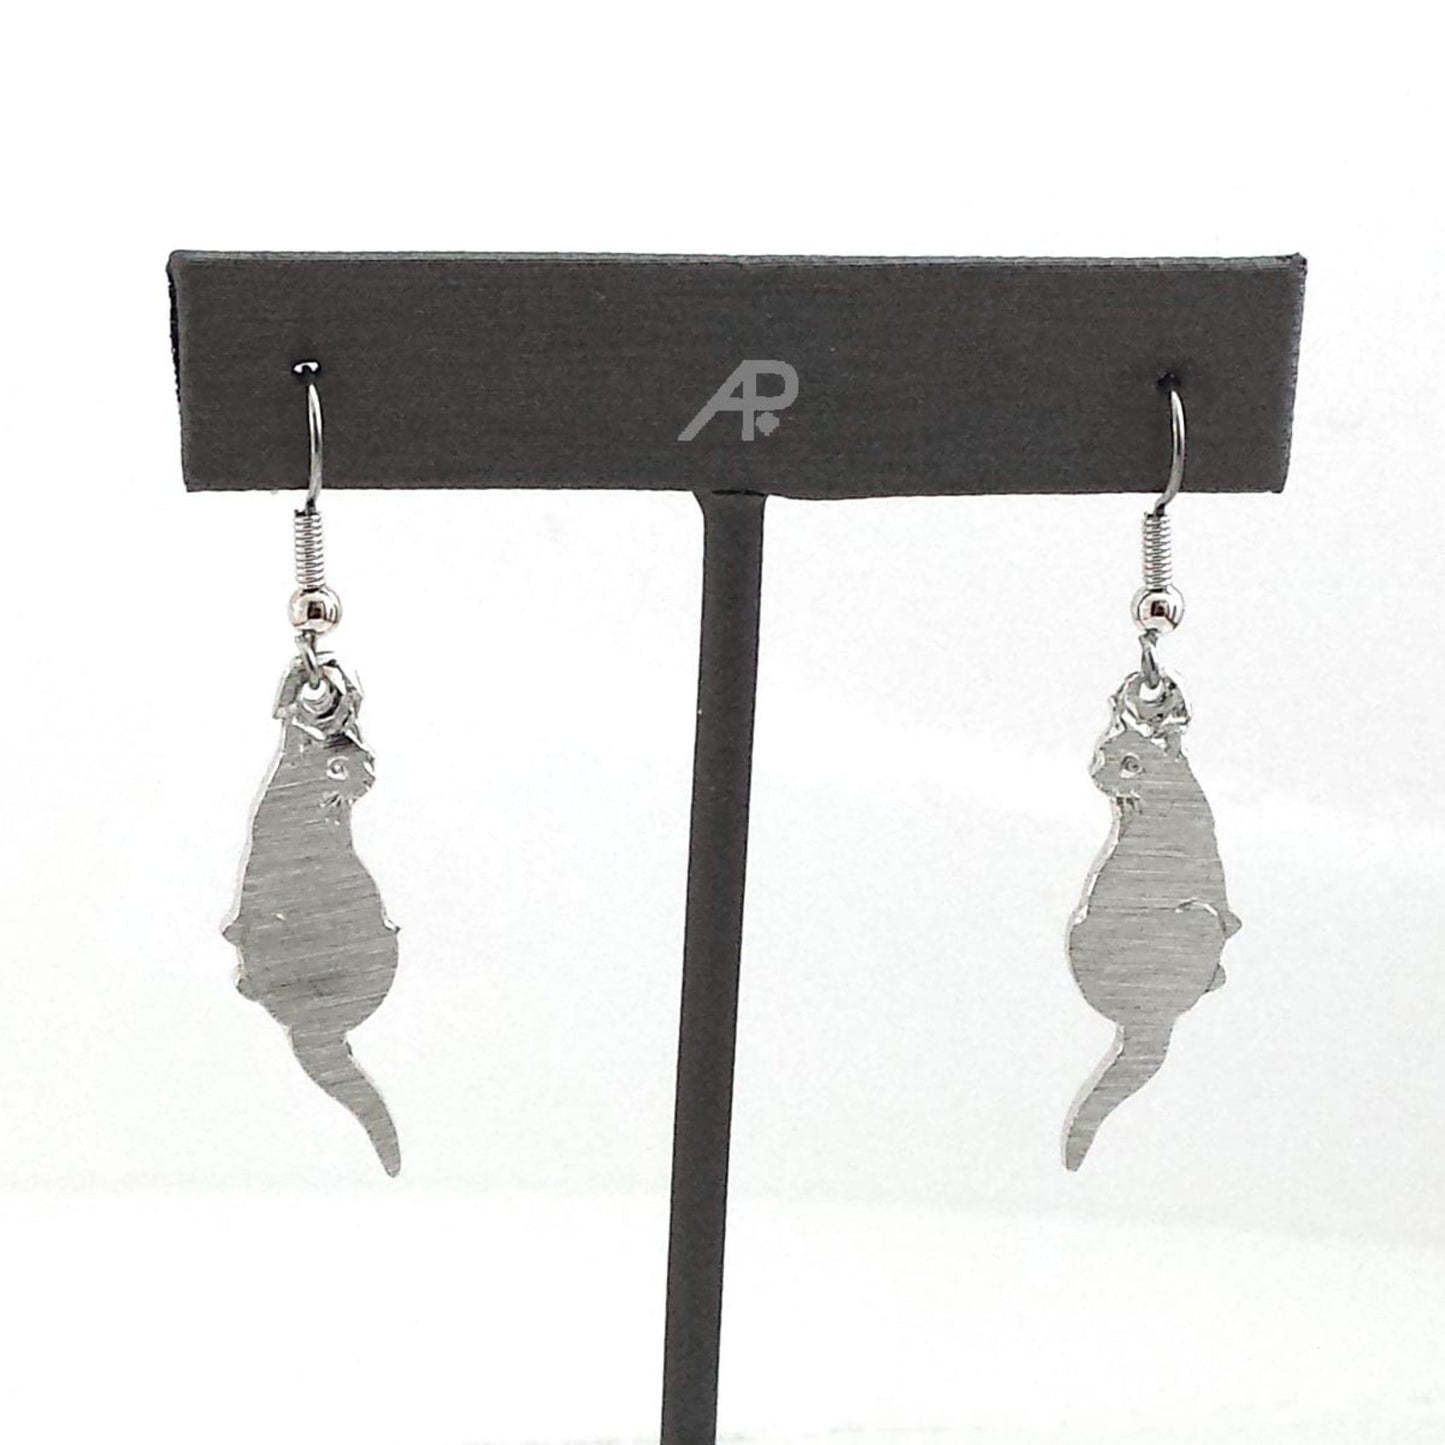 Pewter Jewellery - Tiny Tiger Gift Shop